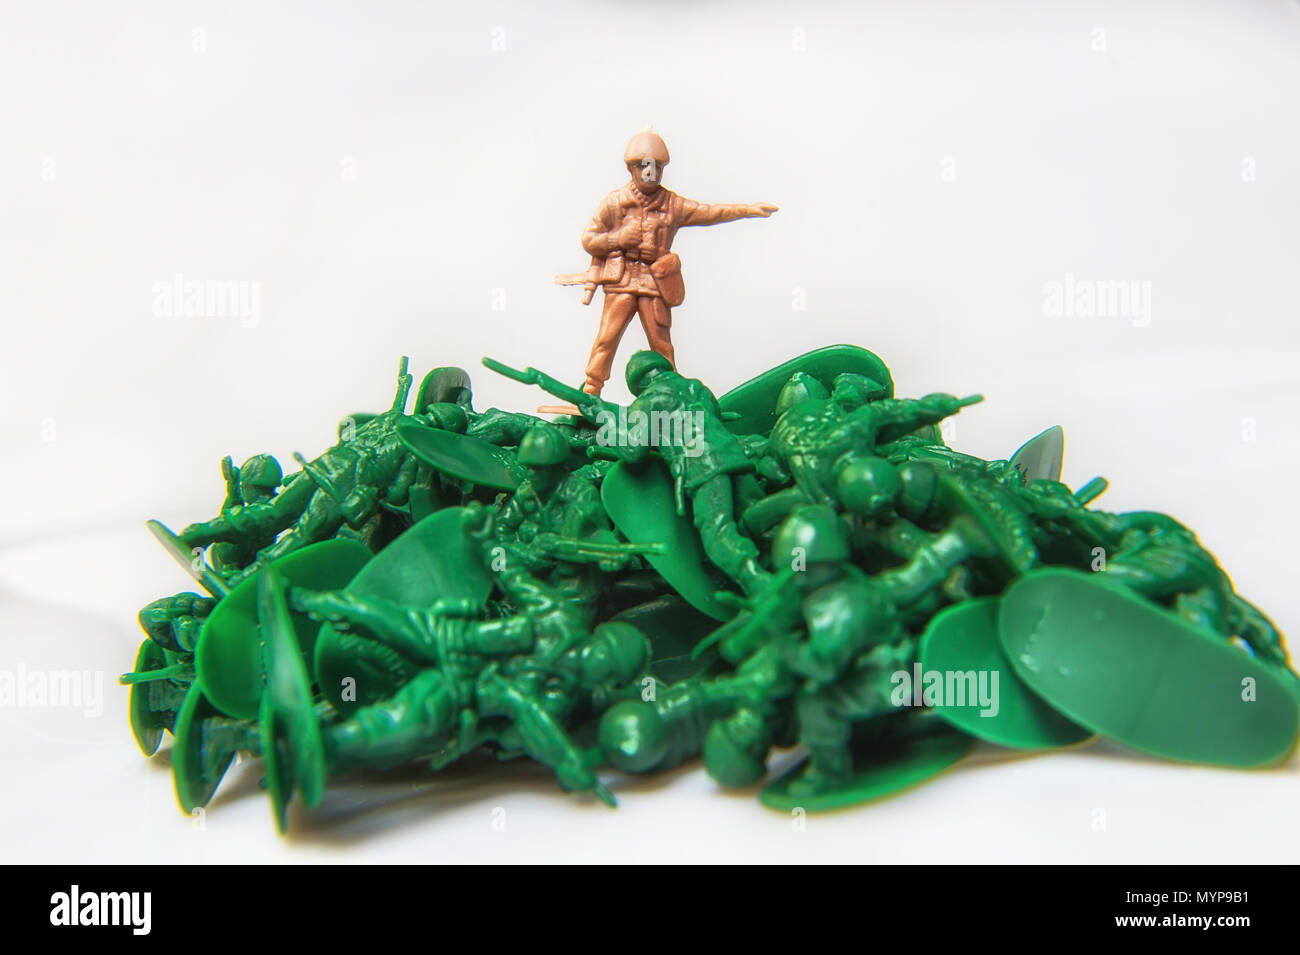 toys soldier Stock Photo